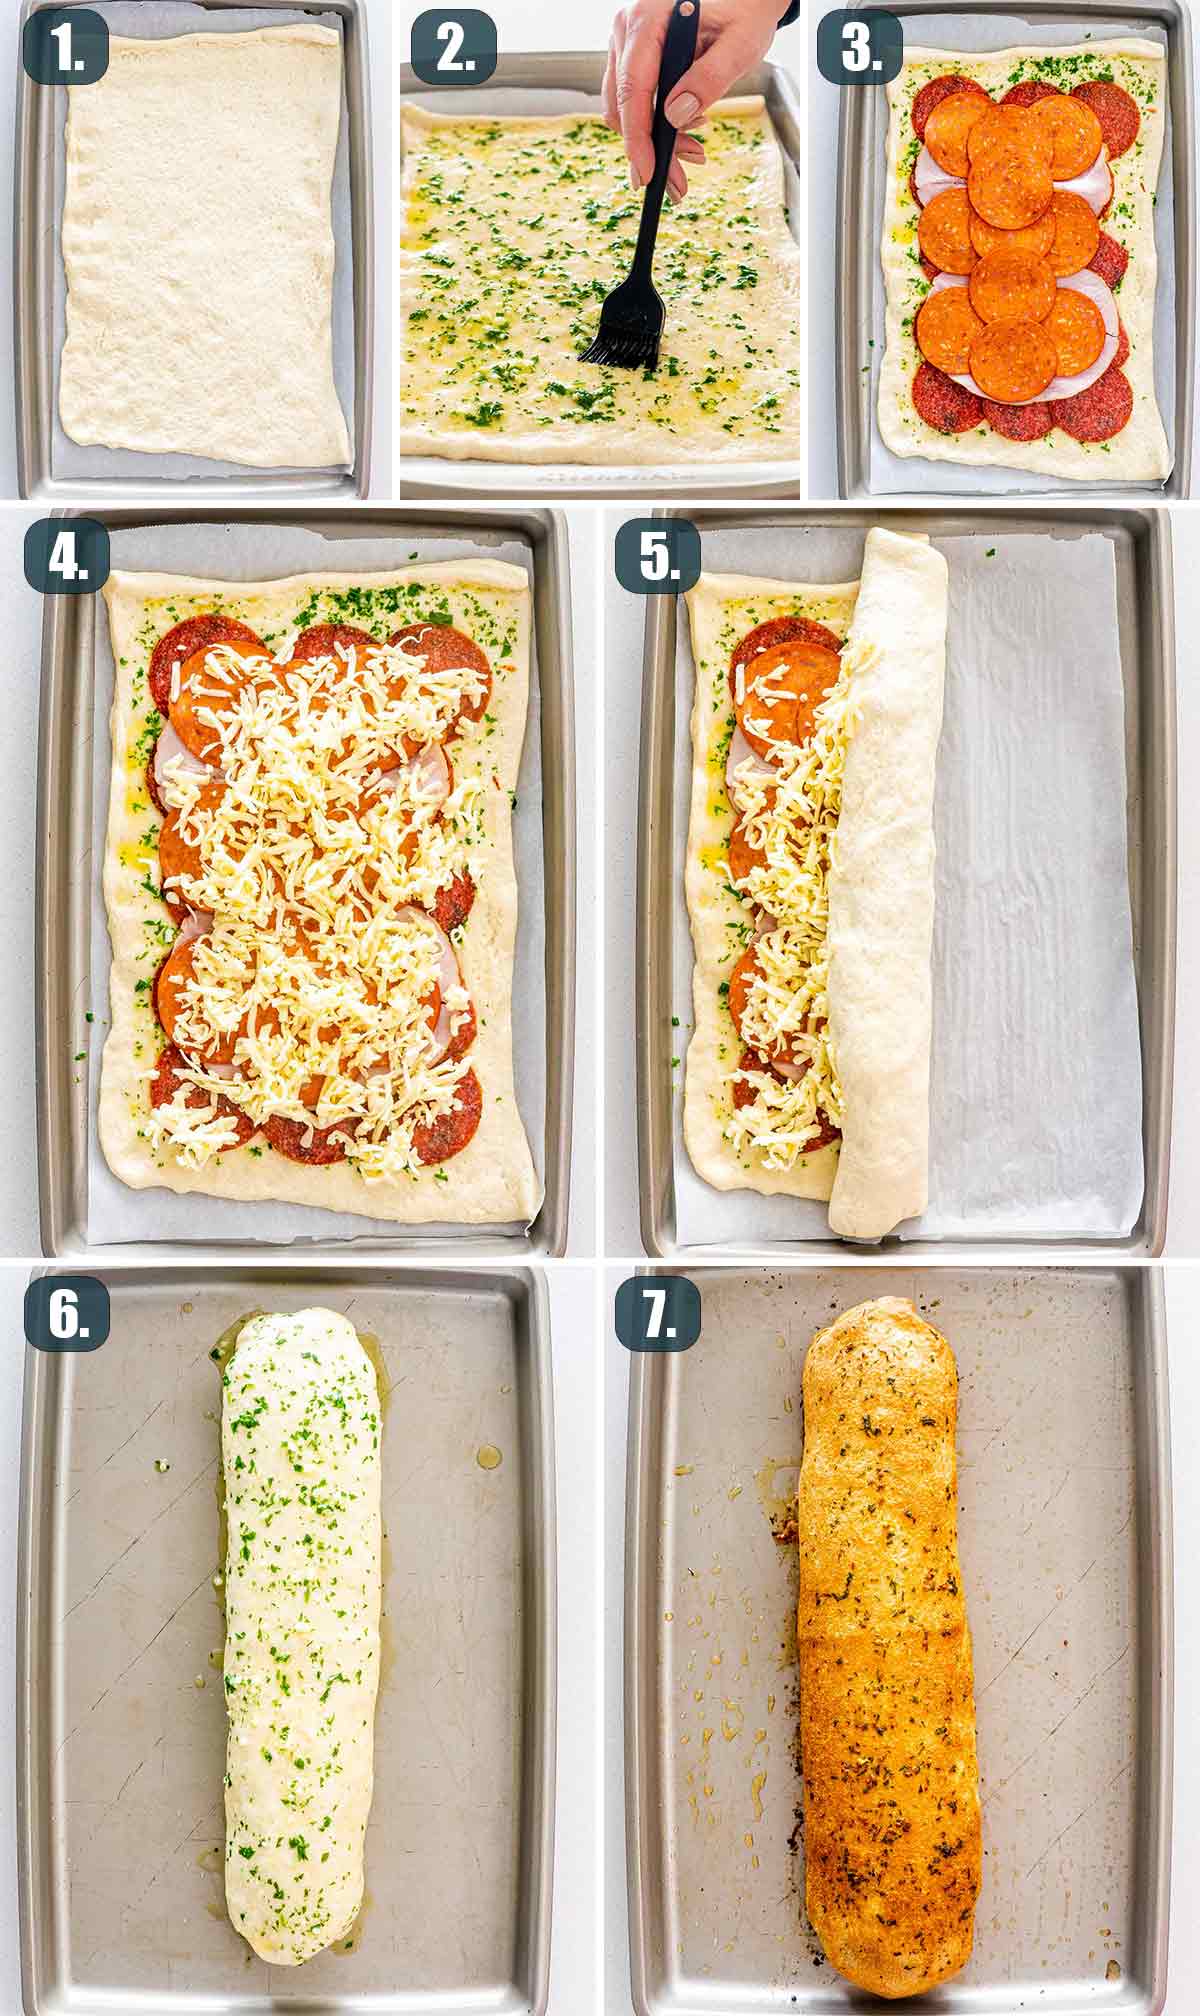 detailed process shots showing how to make stromboli.